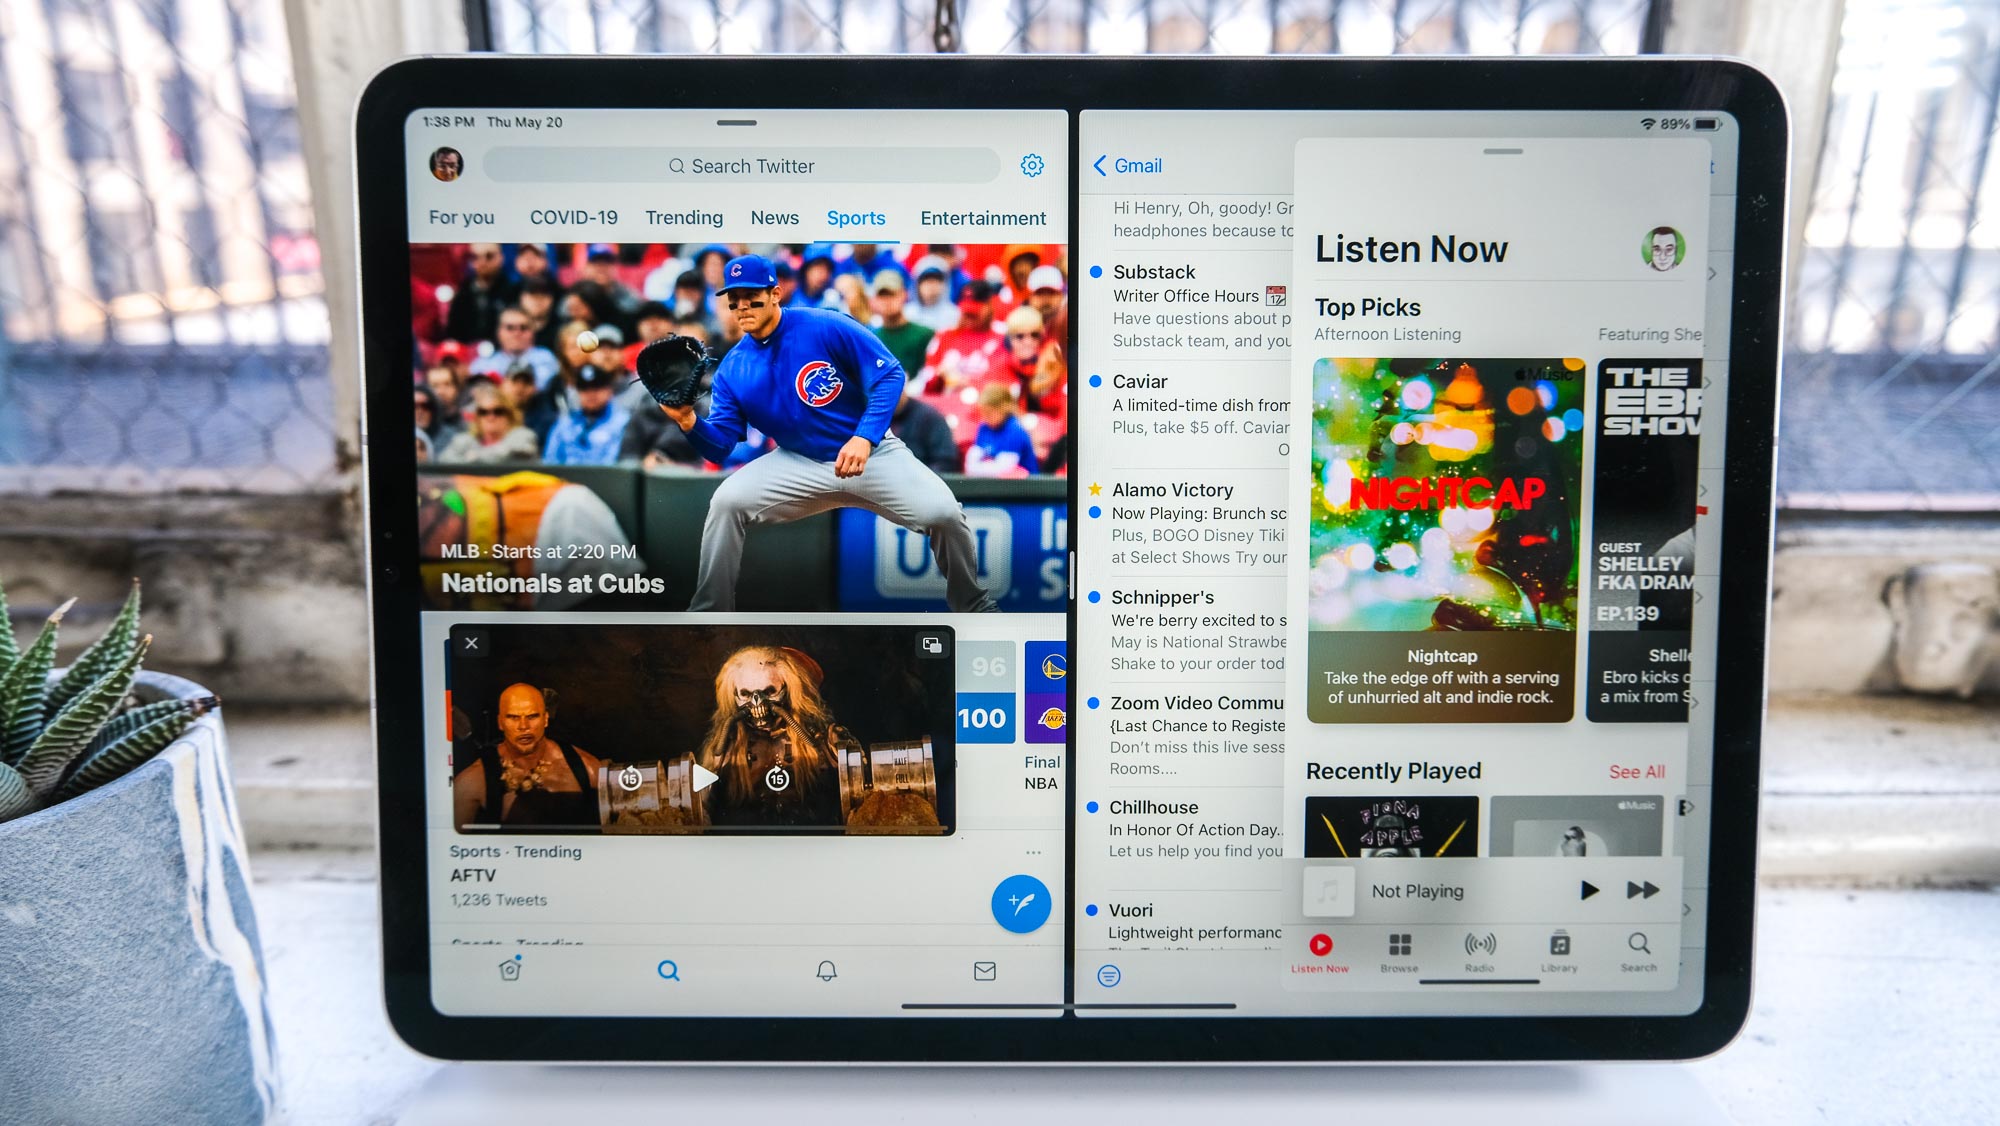 iPad Pro 2021 (11-inch) review